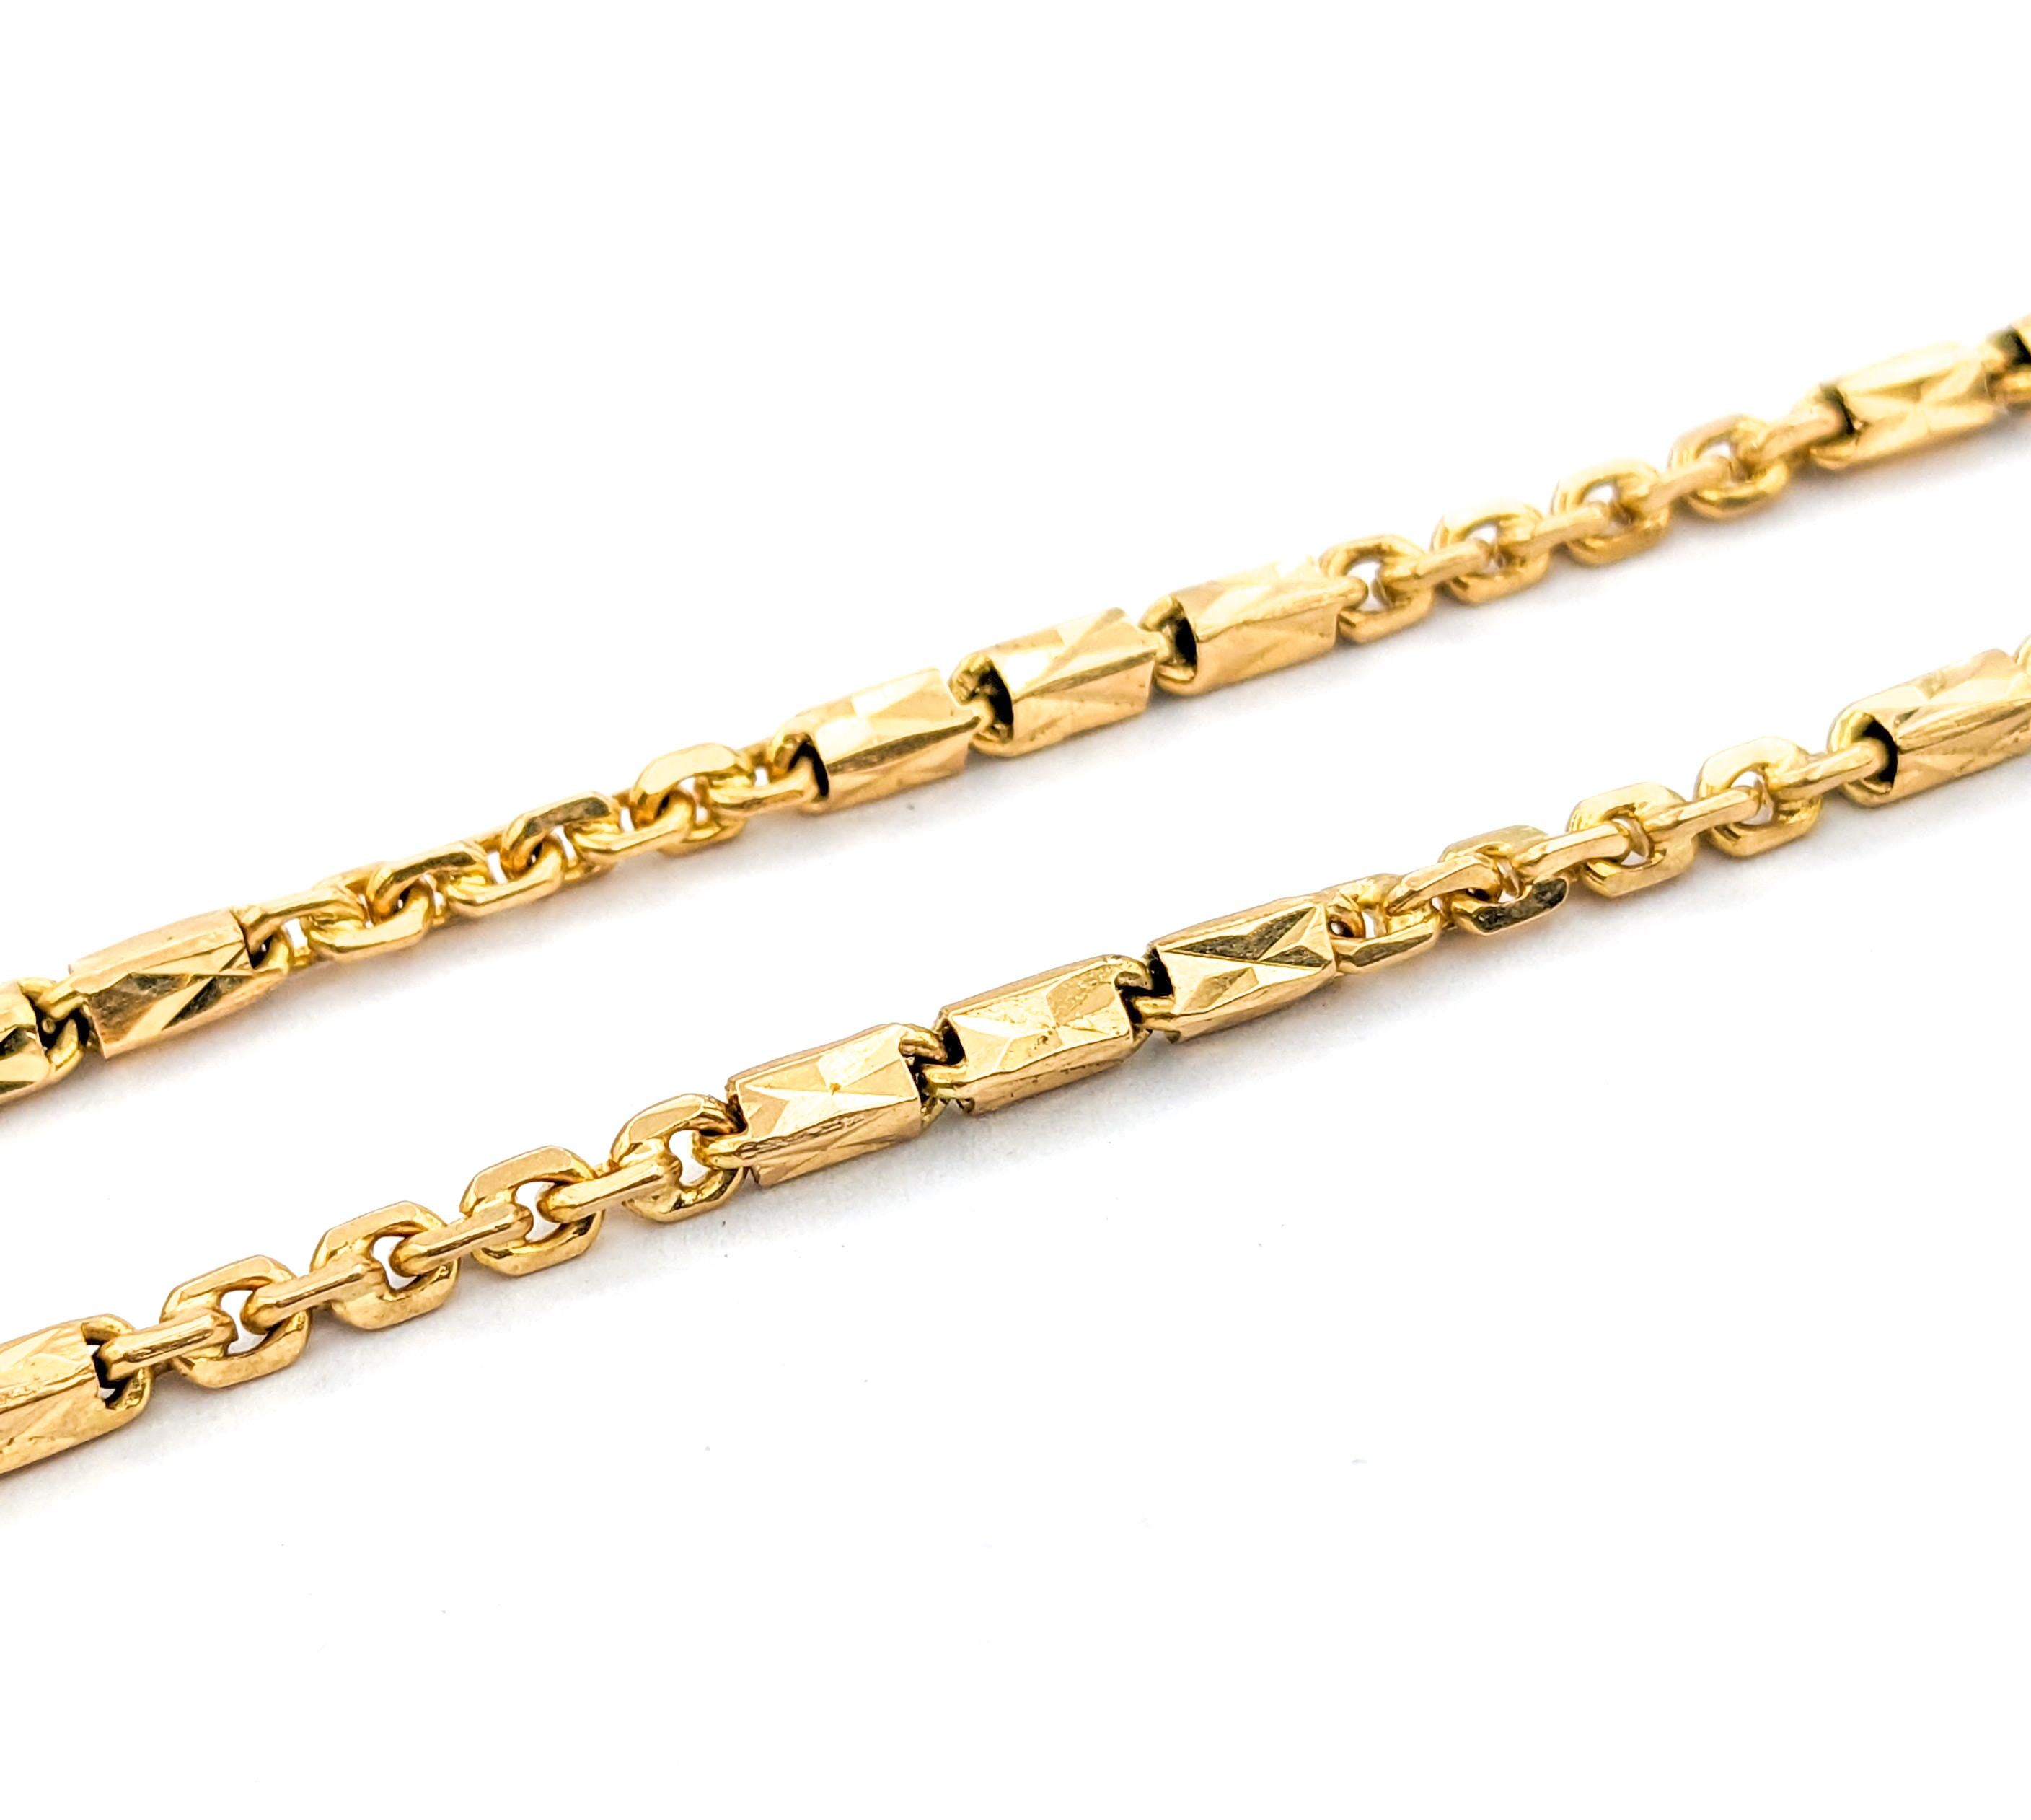 Barrel link design Necklace In Yellow Gold

This exquisite gold fashion necklace, beautifully crafted in 18kt yellow gold, showcases an elegant chain & barrel link design. With a generous length of 28 inches and a width of 2.2mm, this necklace